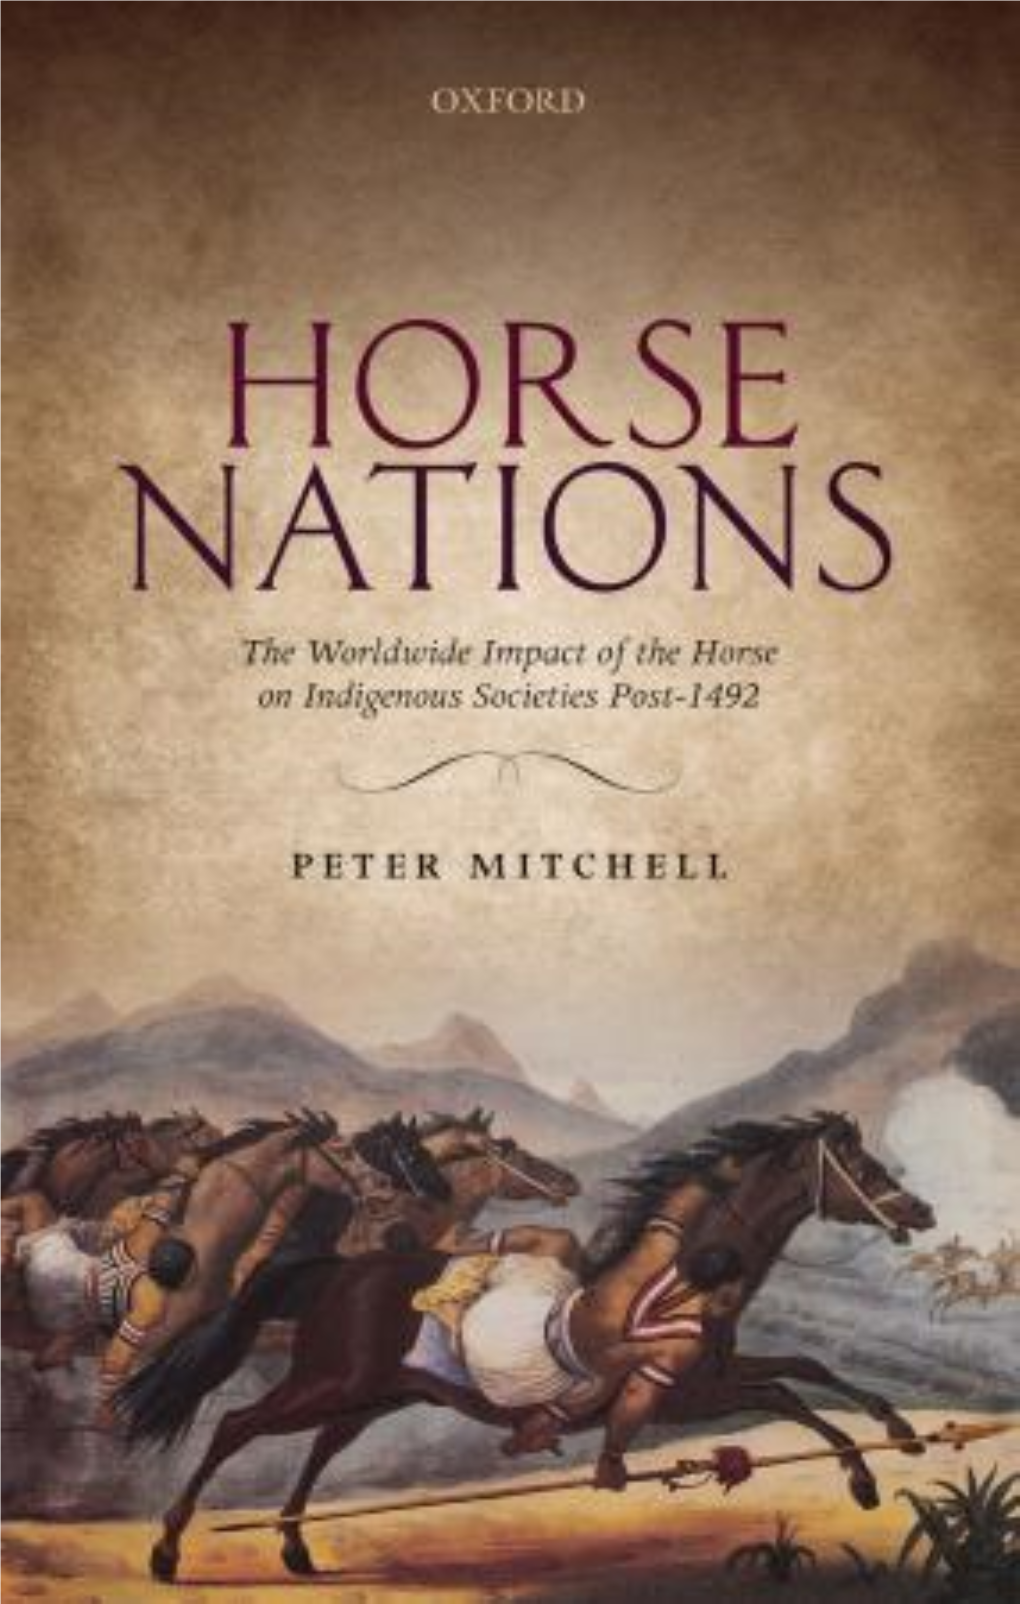 Horse Nations: the Worldwide Impact of the Horse on Indigenous